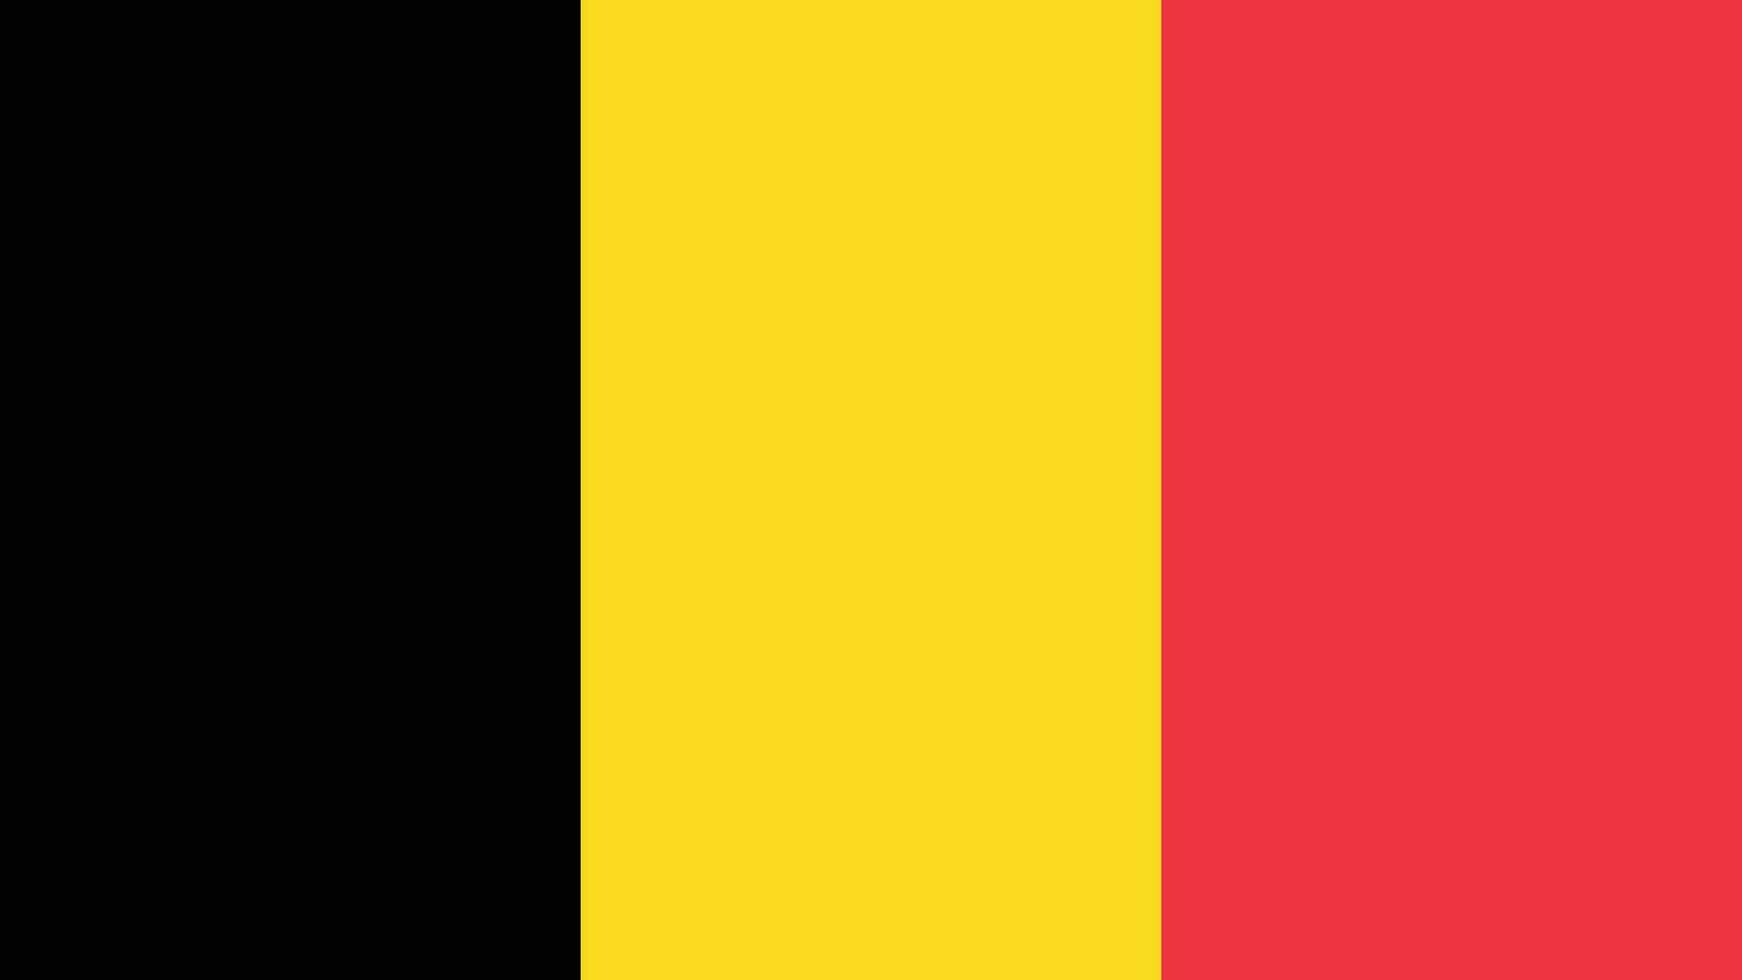 Belgium National Flag. Colors and Proportions - Vector Illustration